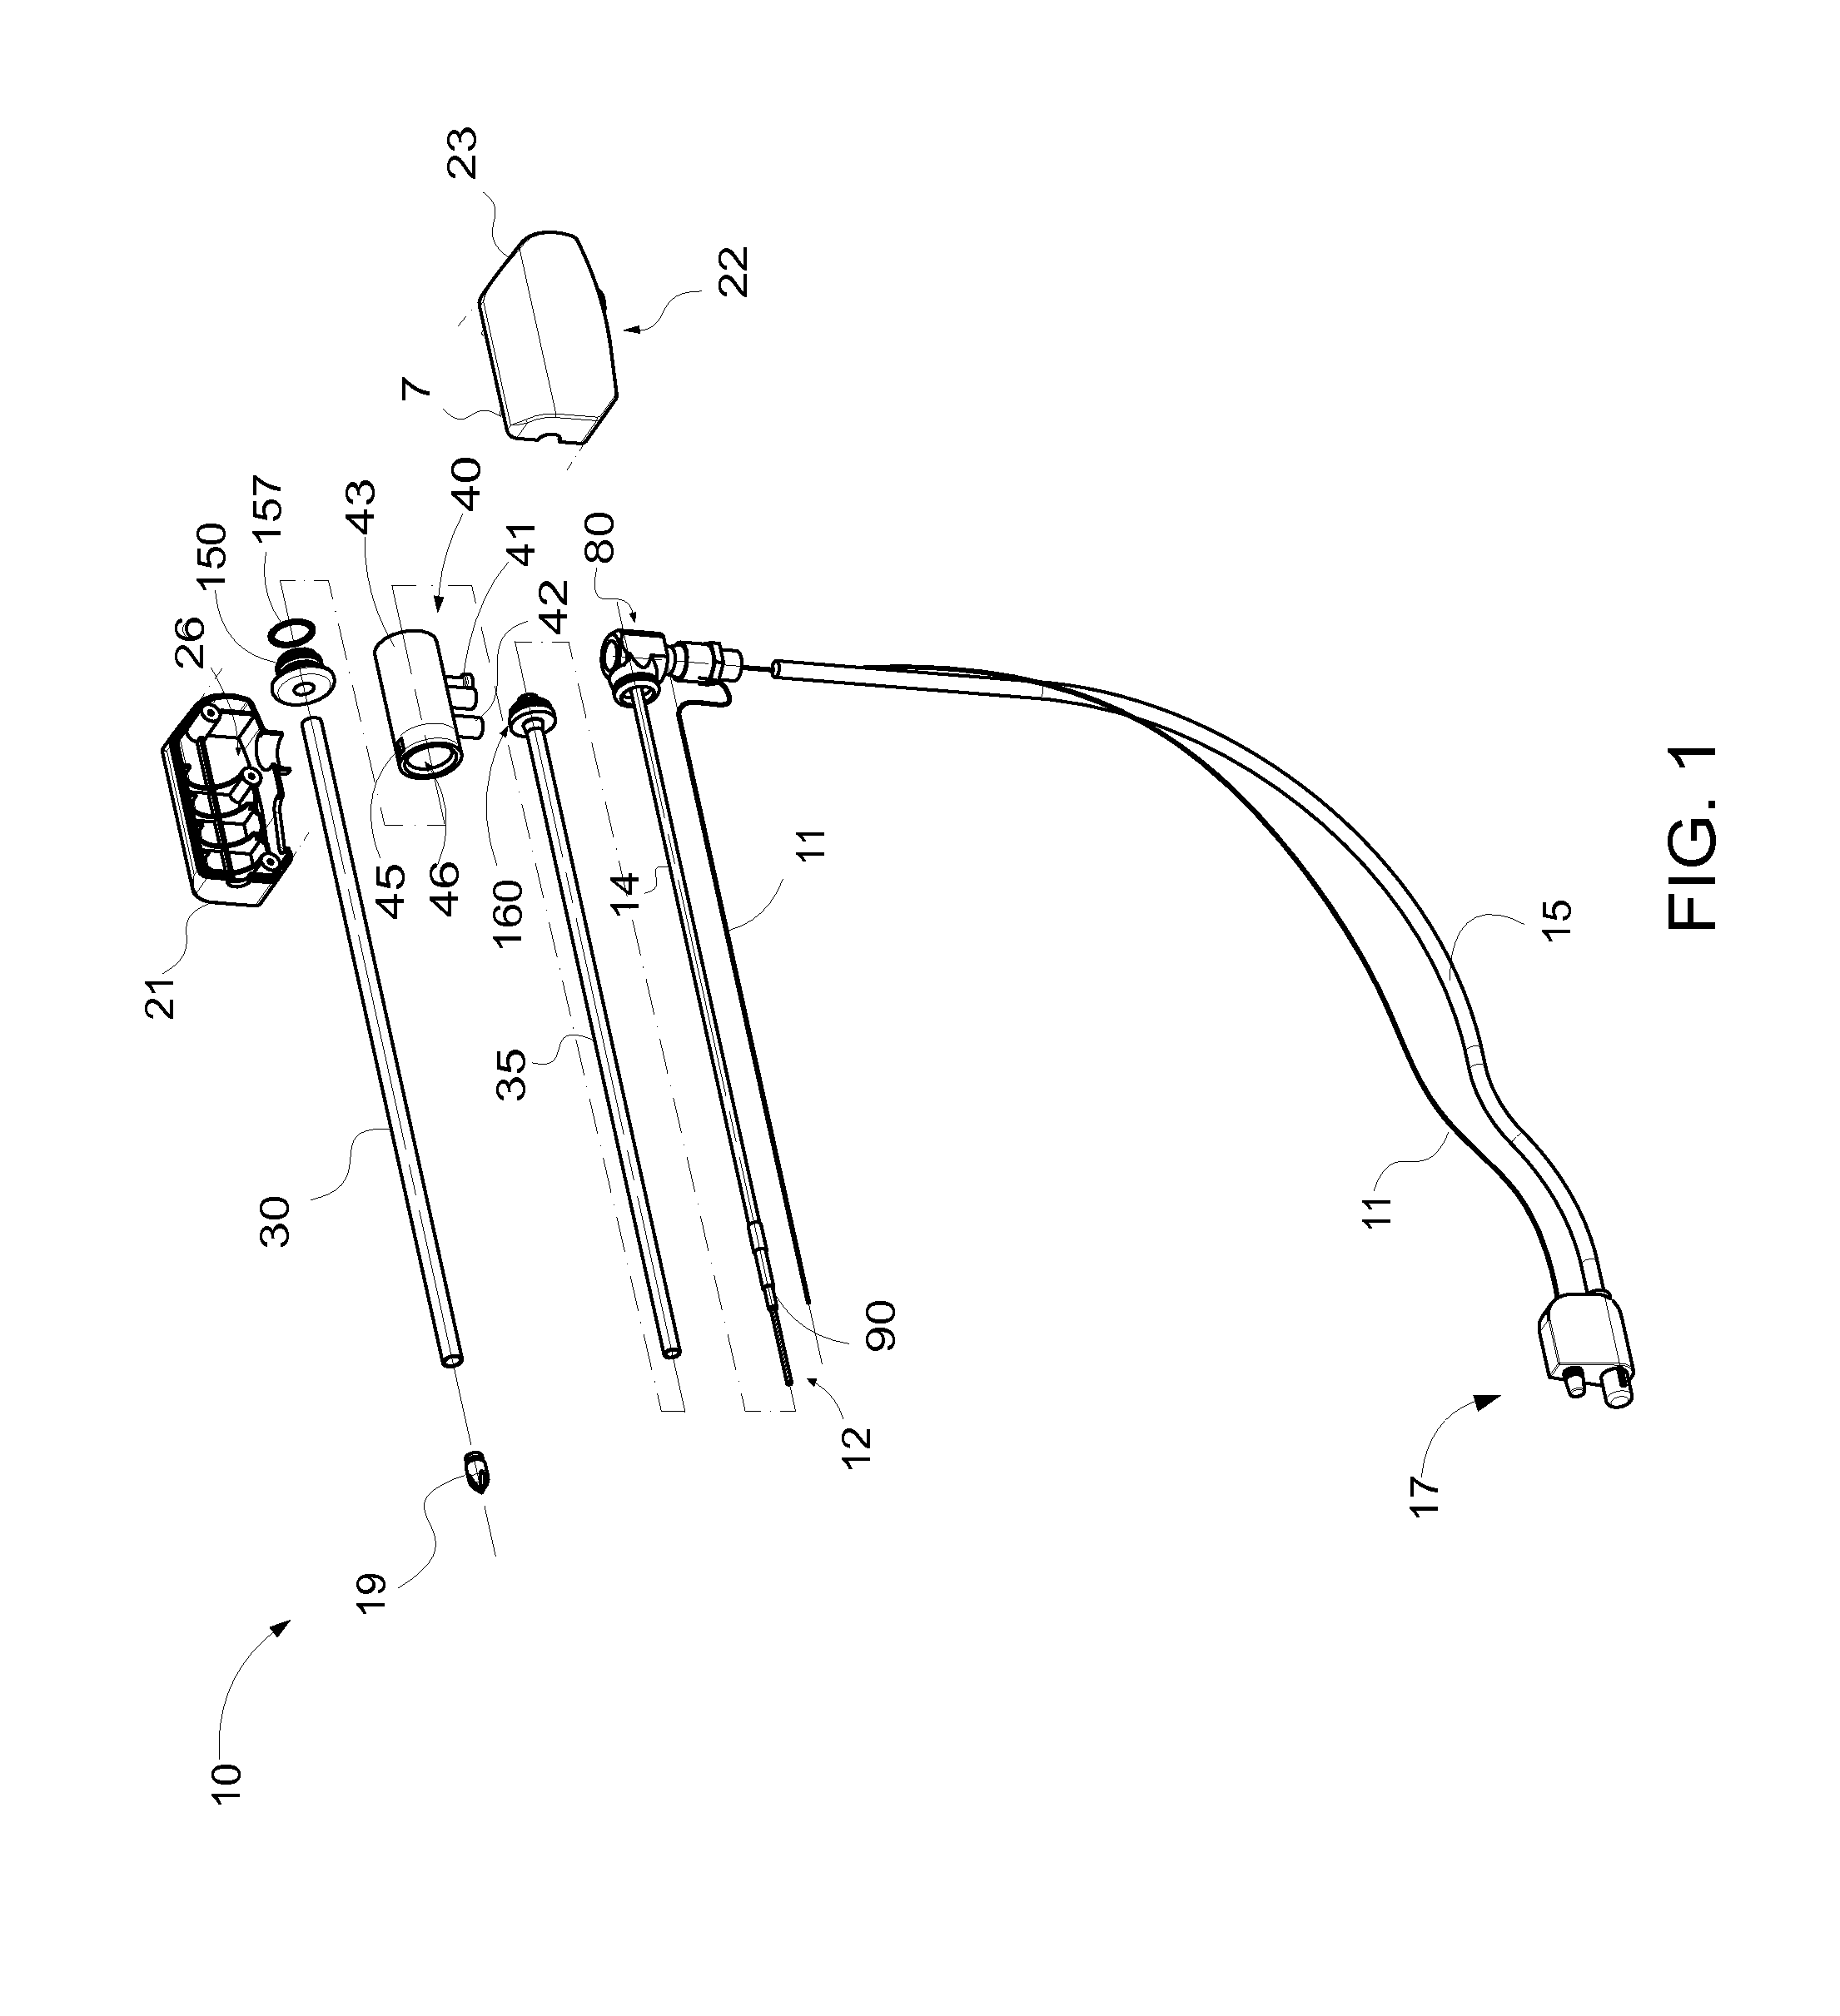 Microwave energy-device and system